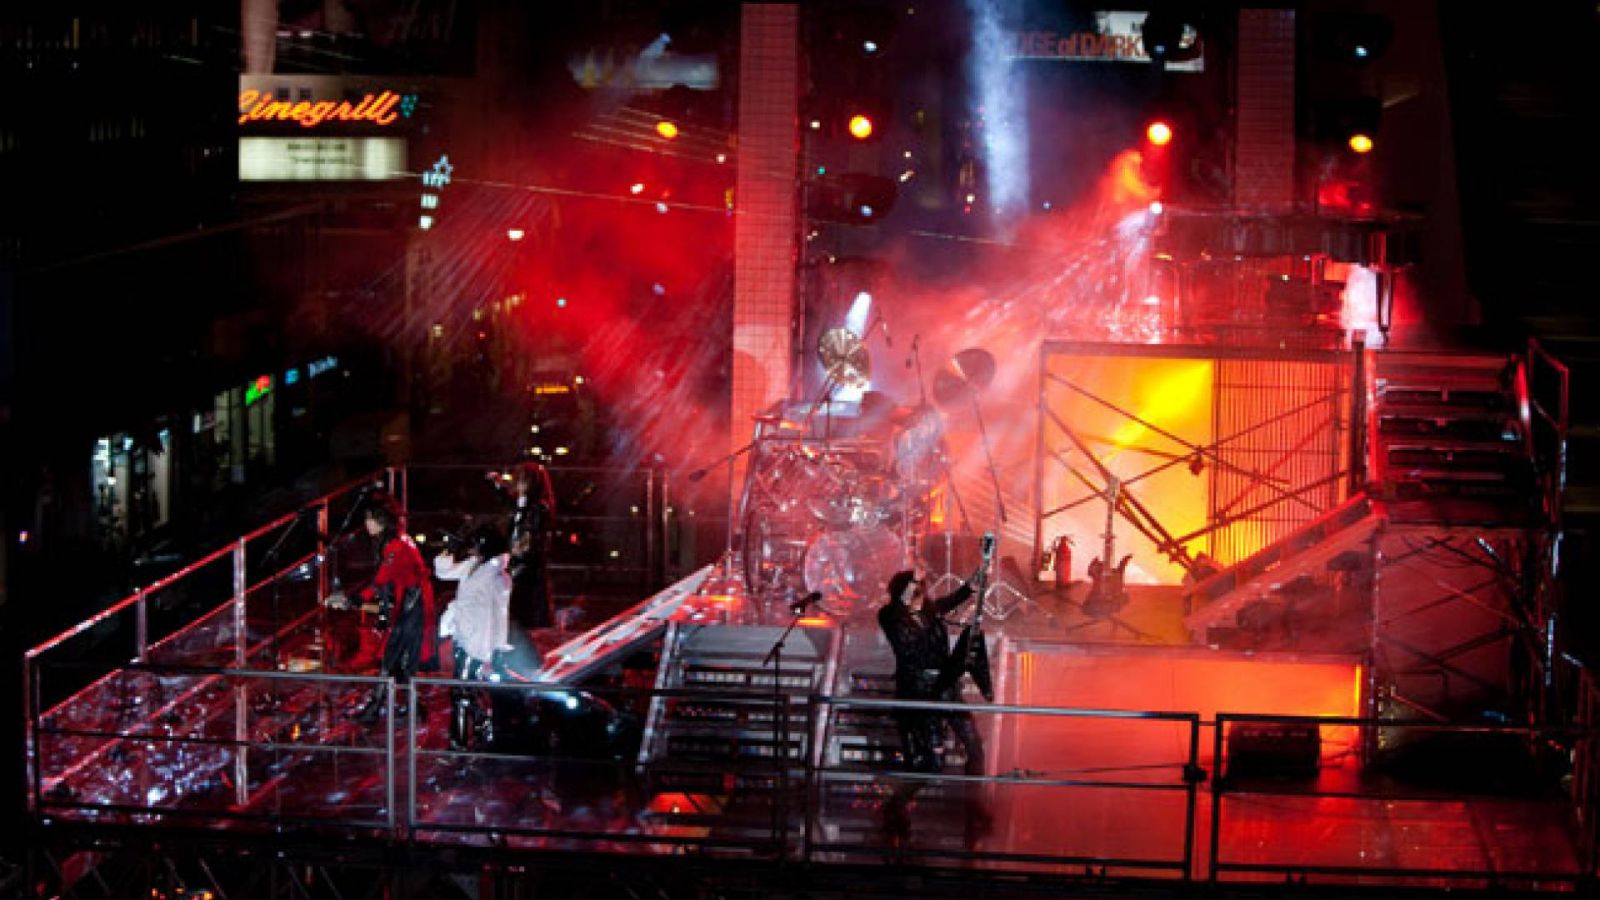 X JAPAN: Filmagens em Hollywood © YSK Entertainment, Inc. 2010. All Rights Reserved